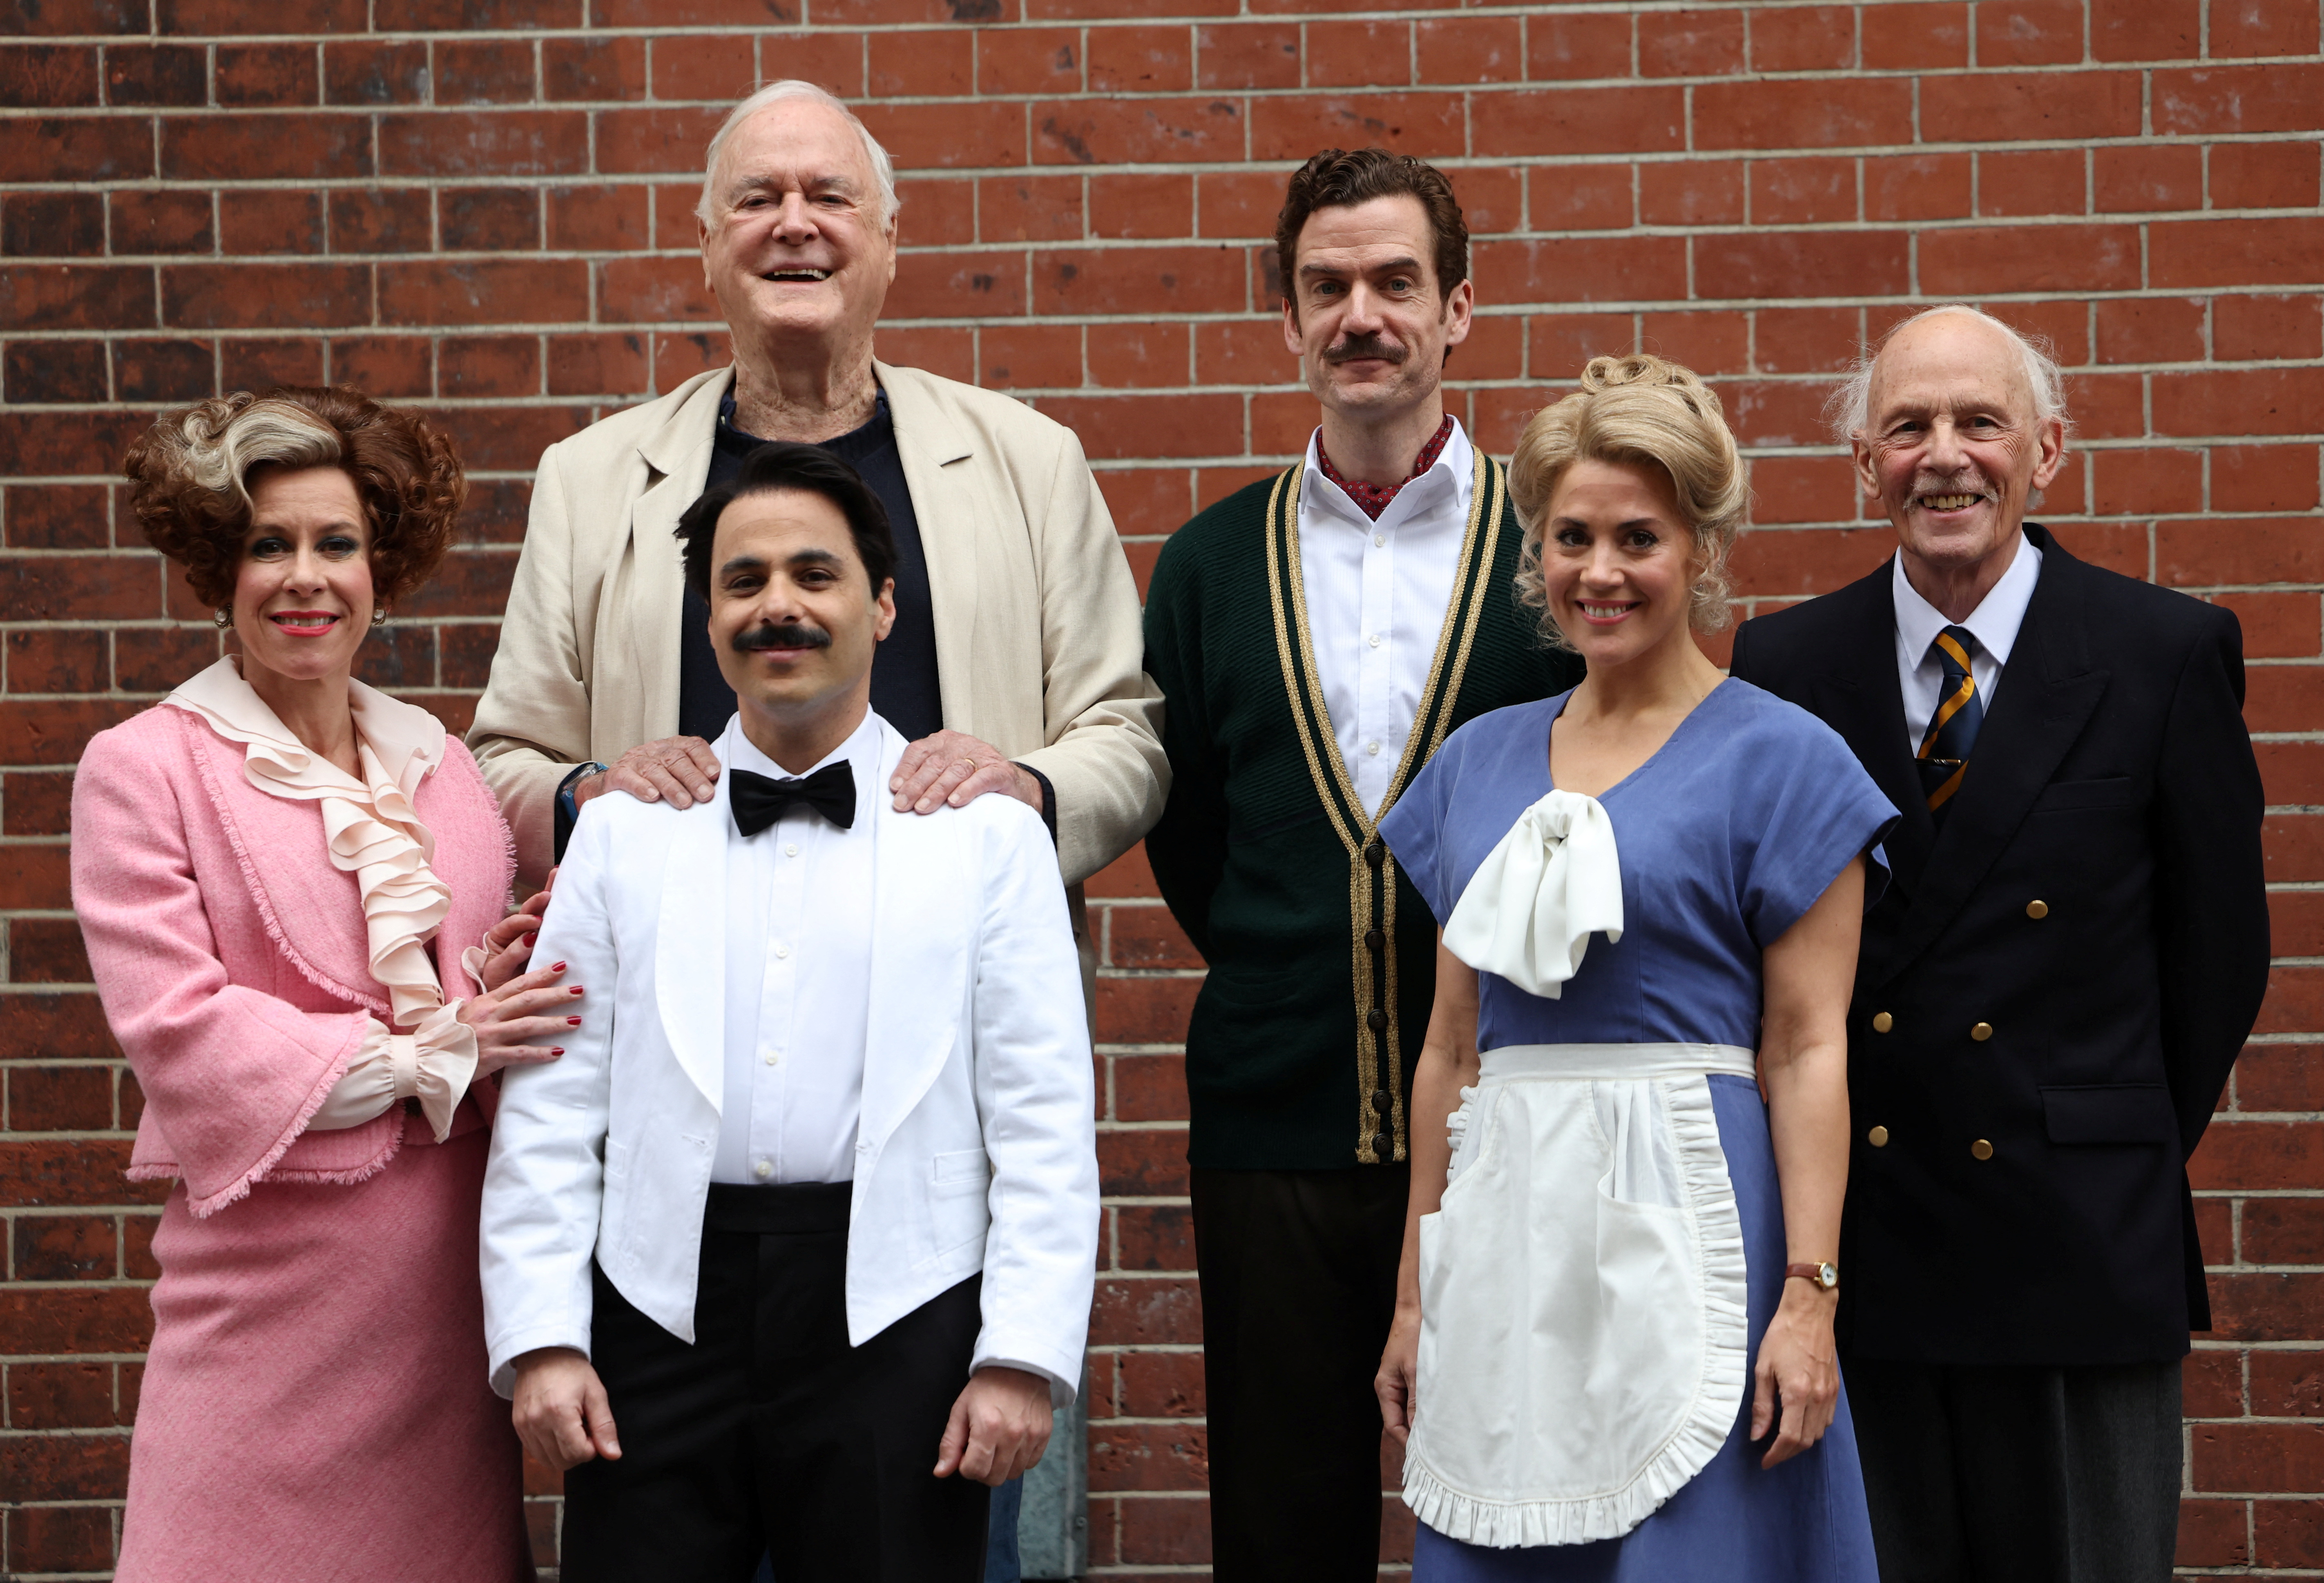 British actor John Cleese poses with cast members from the play Fawlty Towers in London